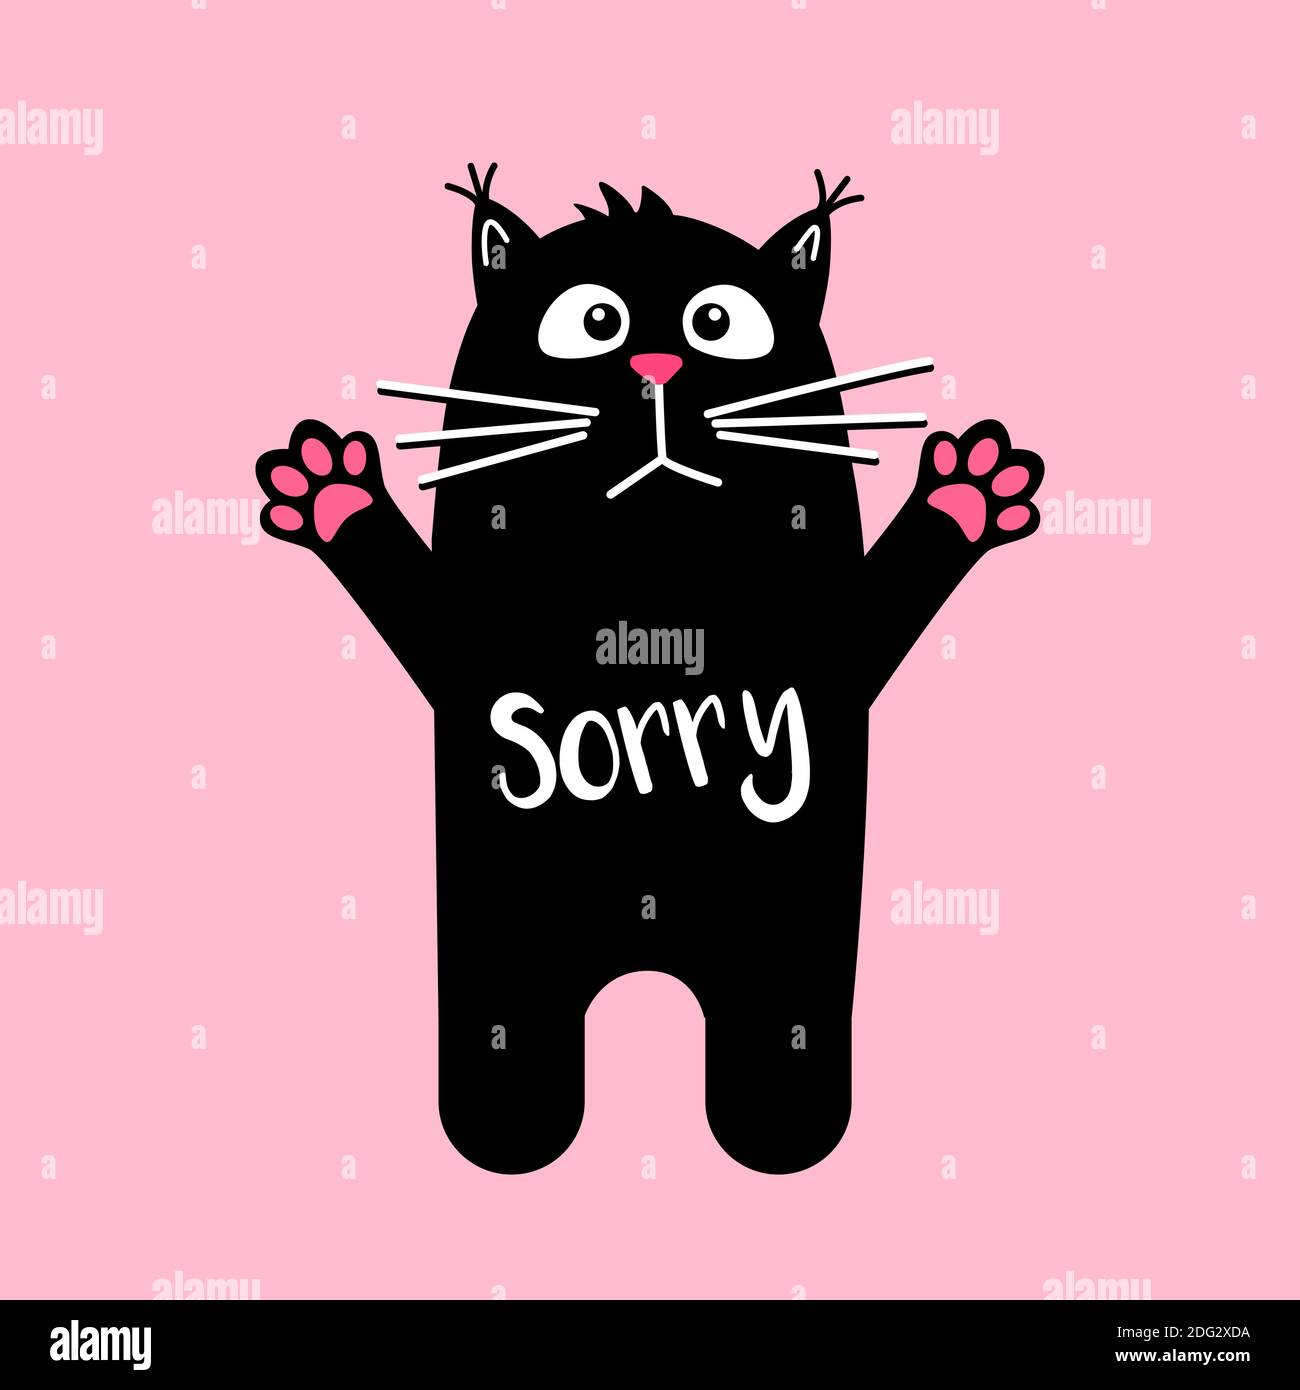 Sad cute cat with text Sorry. Kawaii black cat on pink background ...